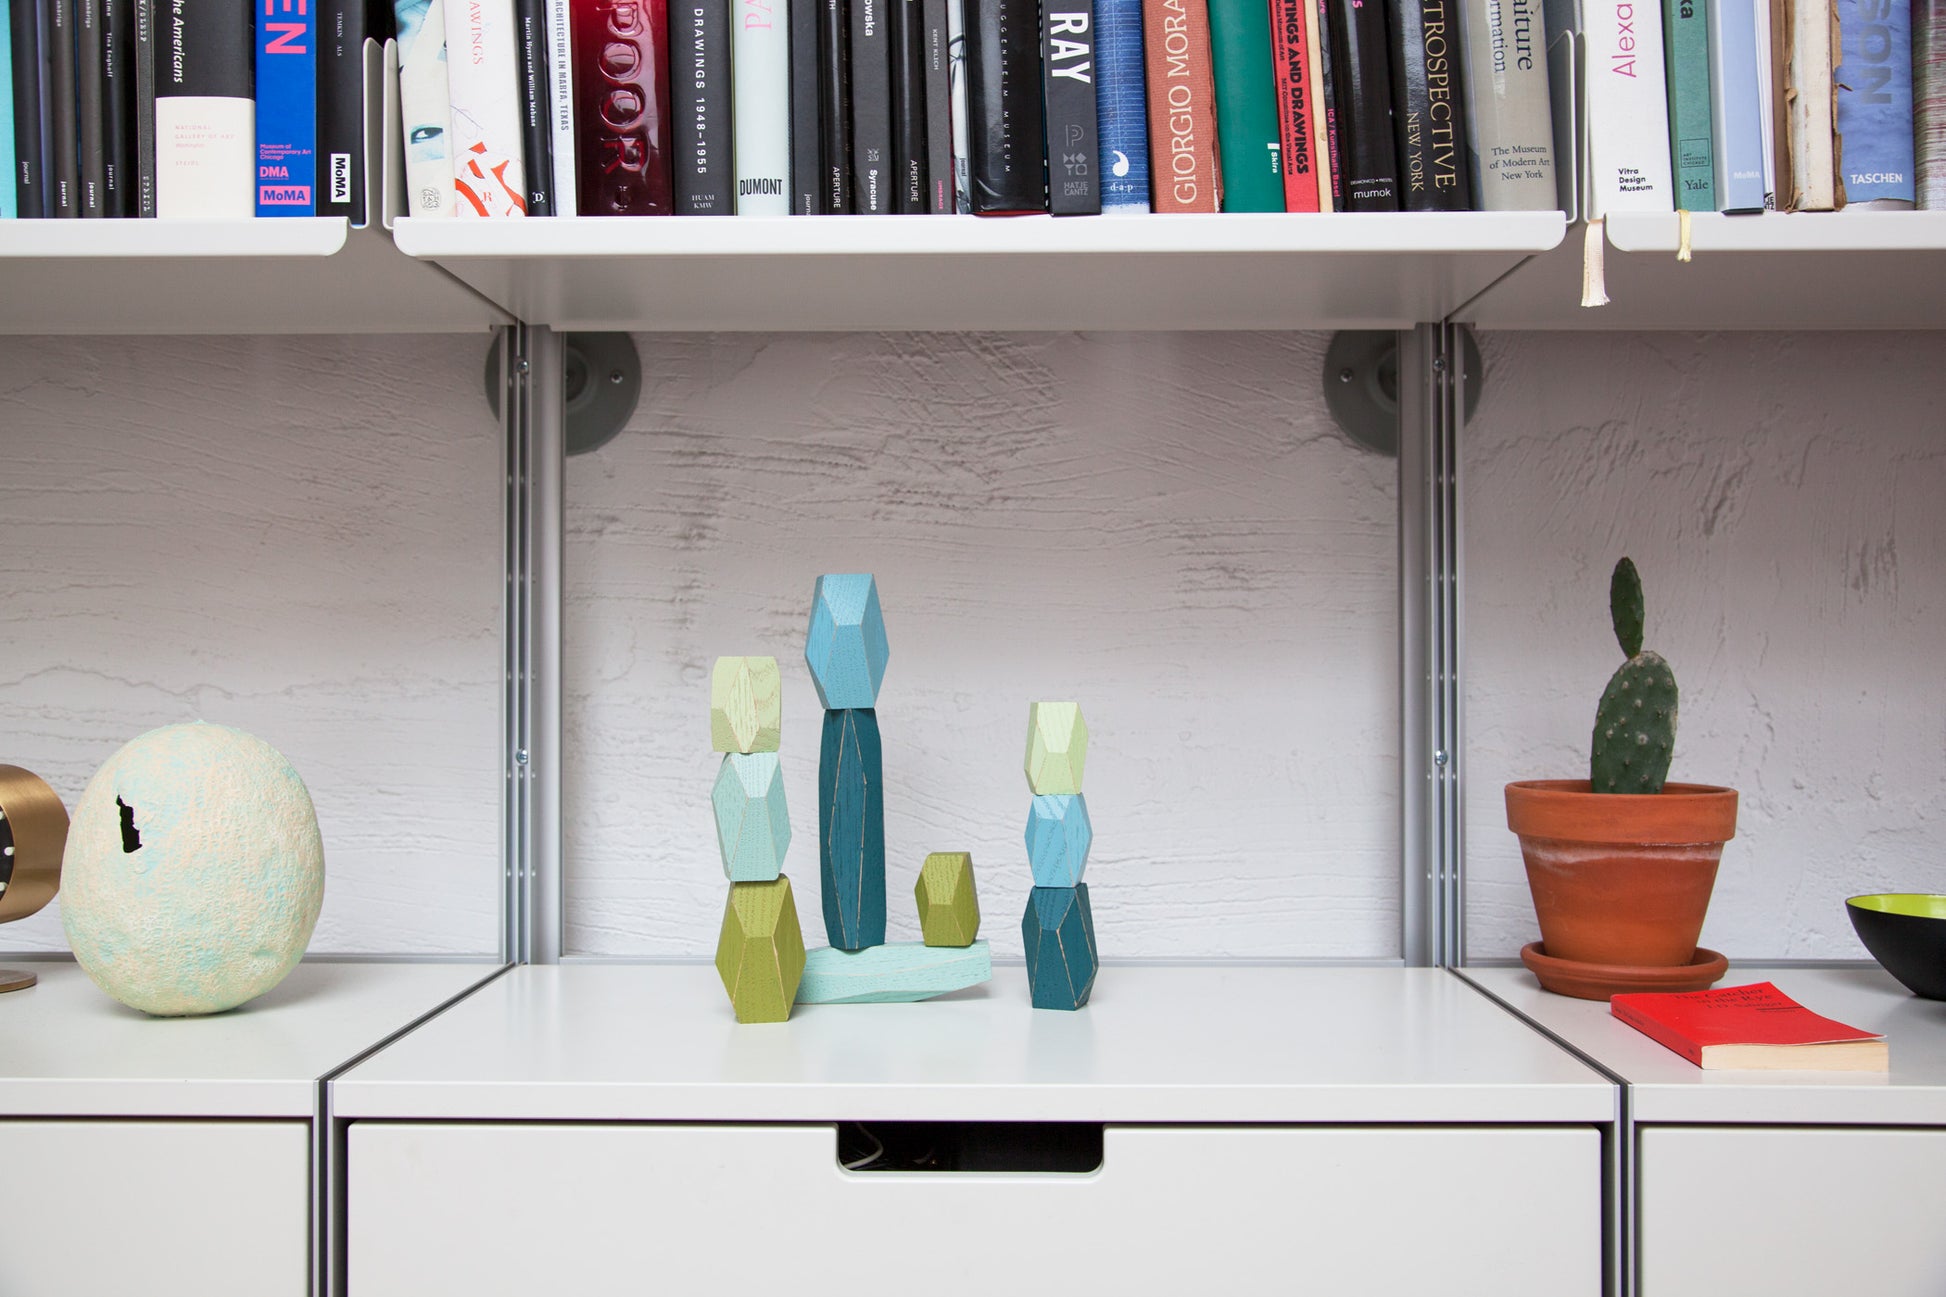 Faceted wooden shapes in various shades of blue and green, on a white desk.